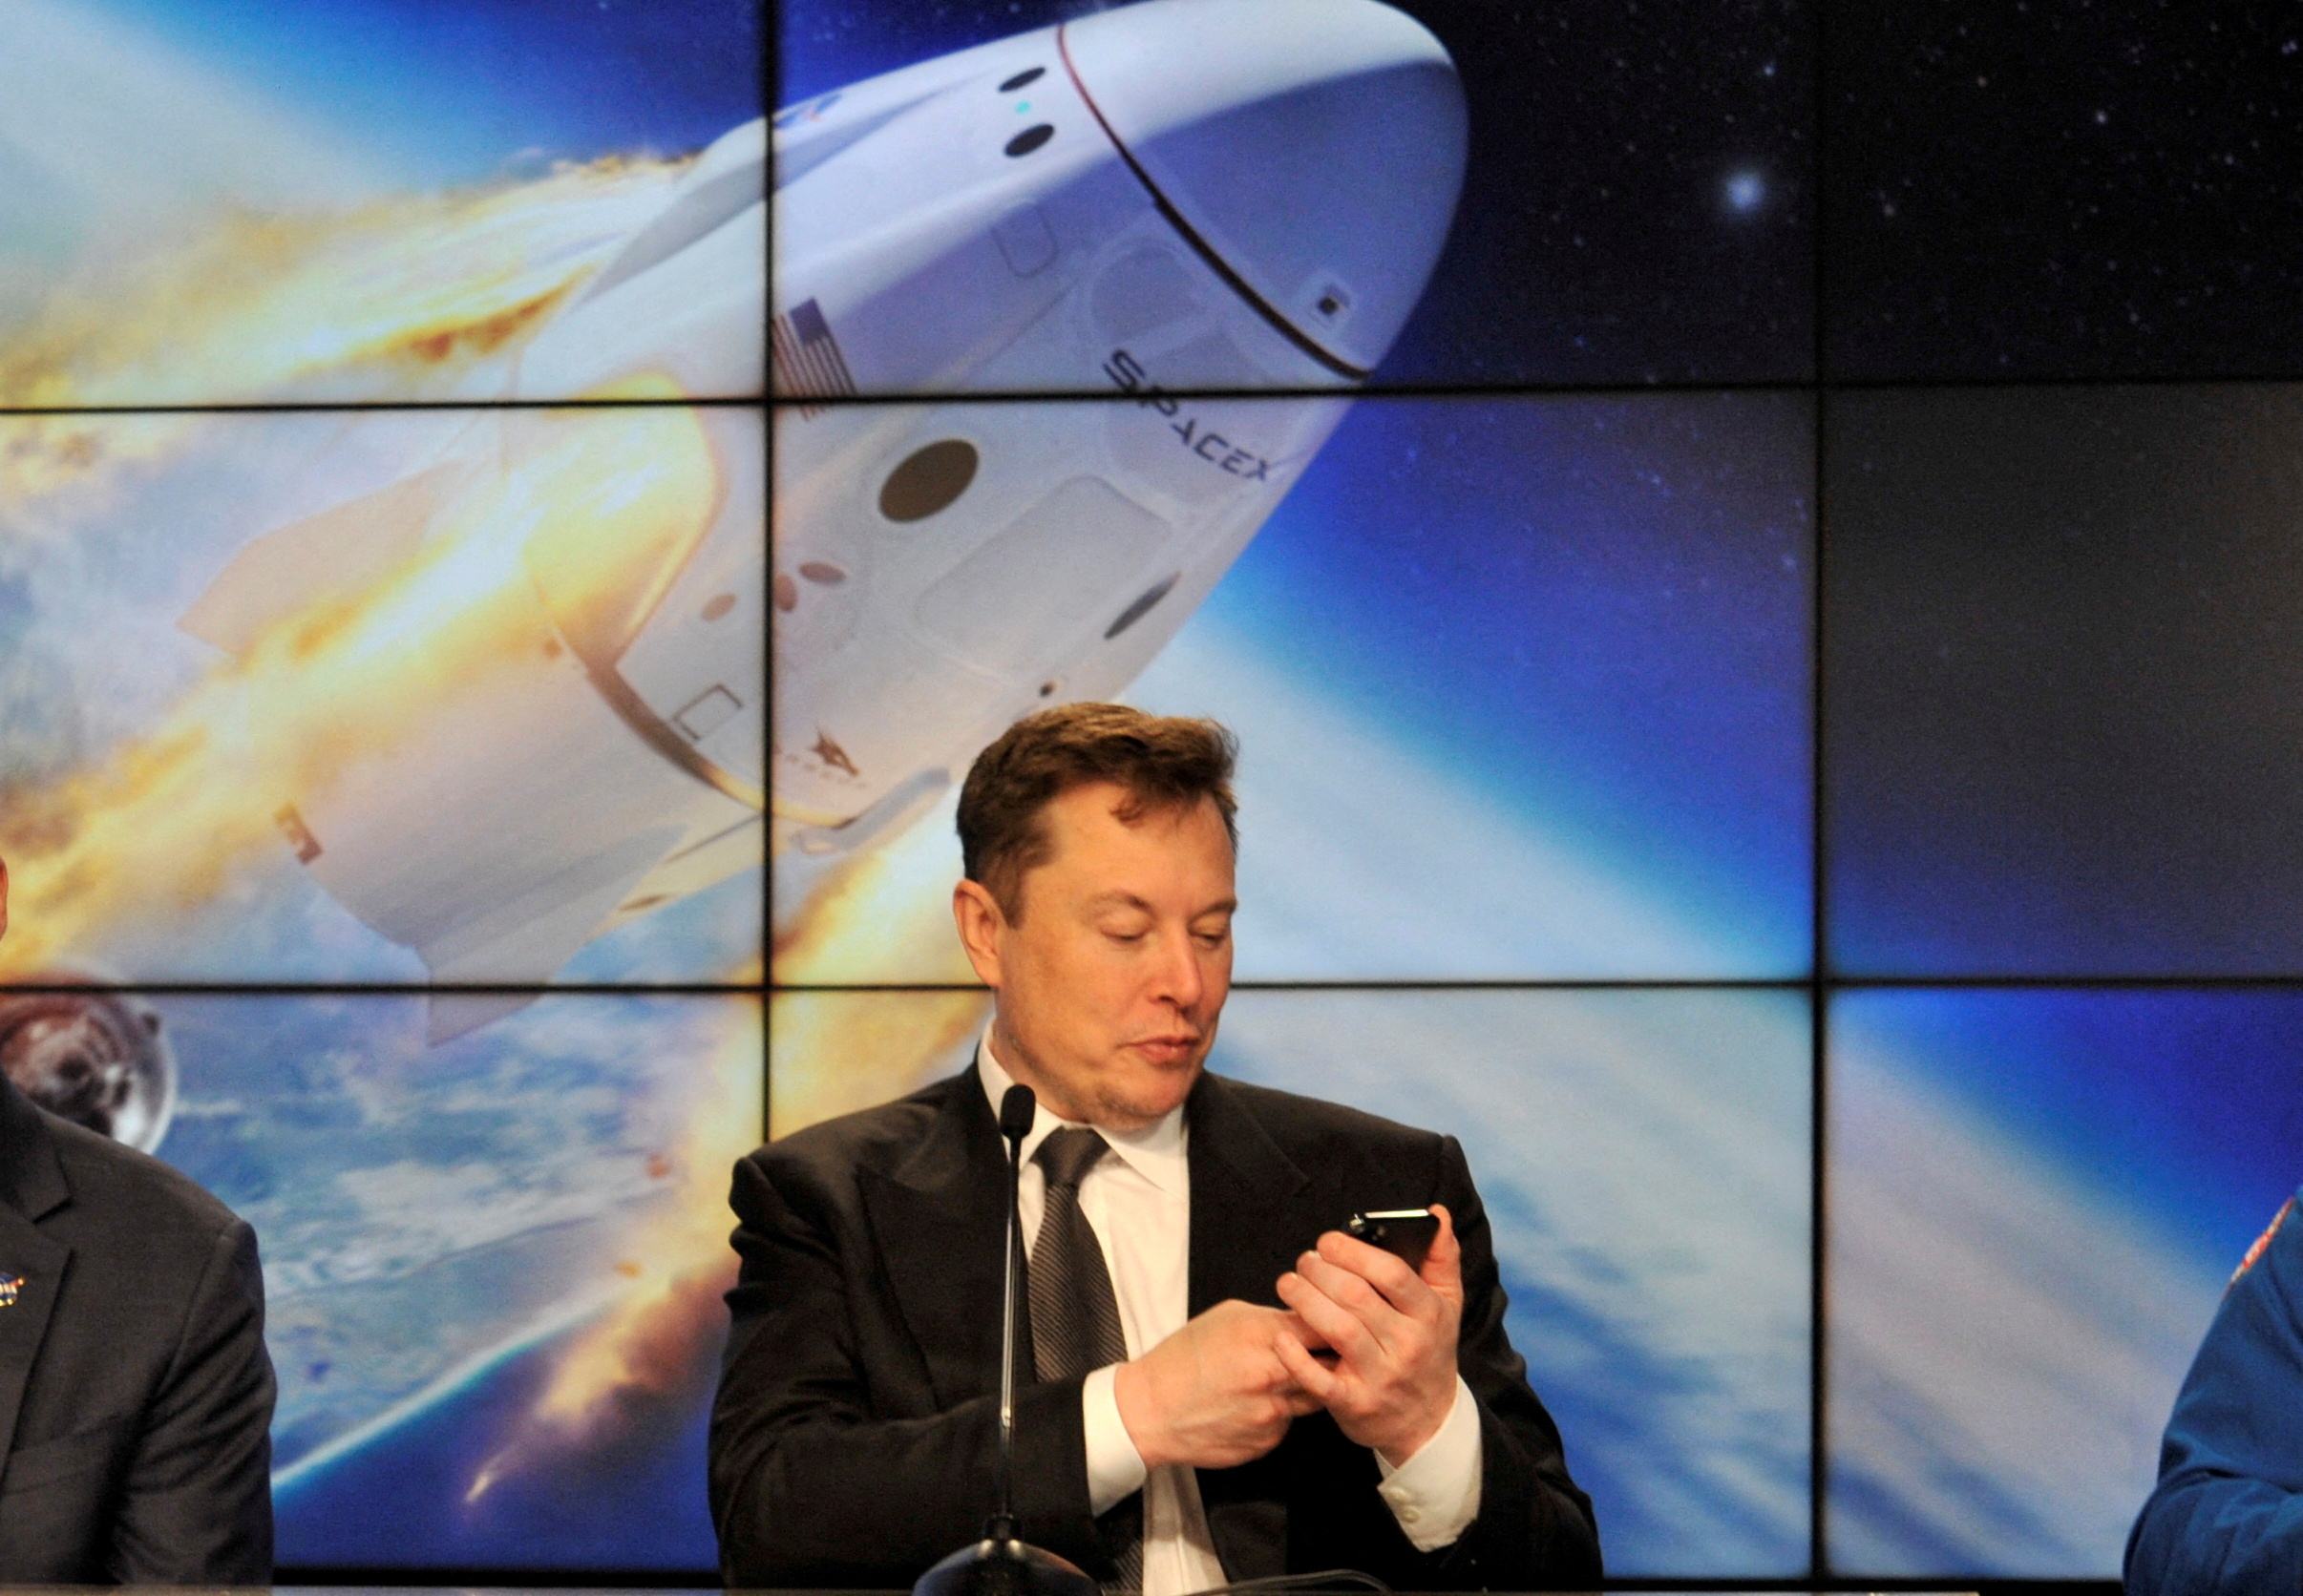 FILE PHOTO: Elon Musk looks at his mobile phone at the Kennedy Space Center in Cape Canaveral, Florida, U.S. January 19, 2020. REUTERS/Steve Nesius/File Photo